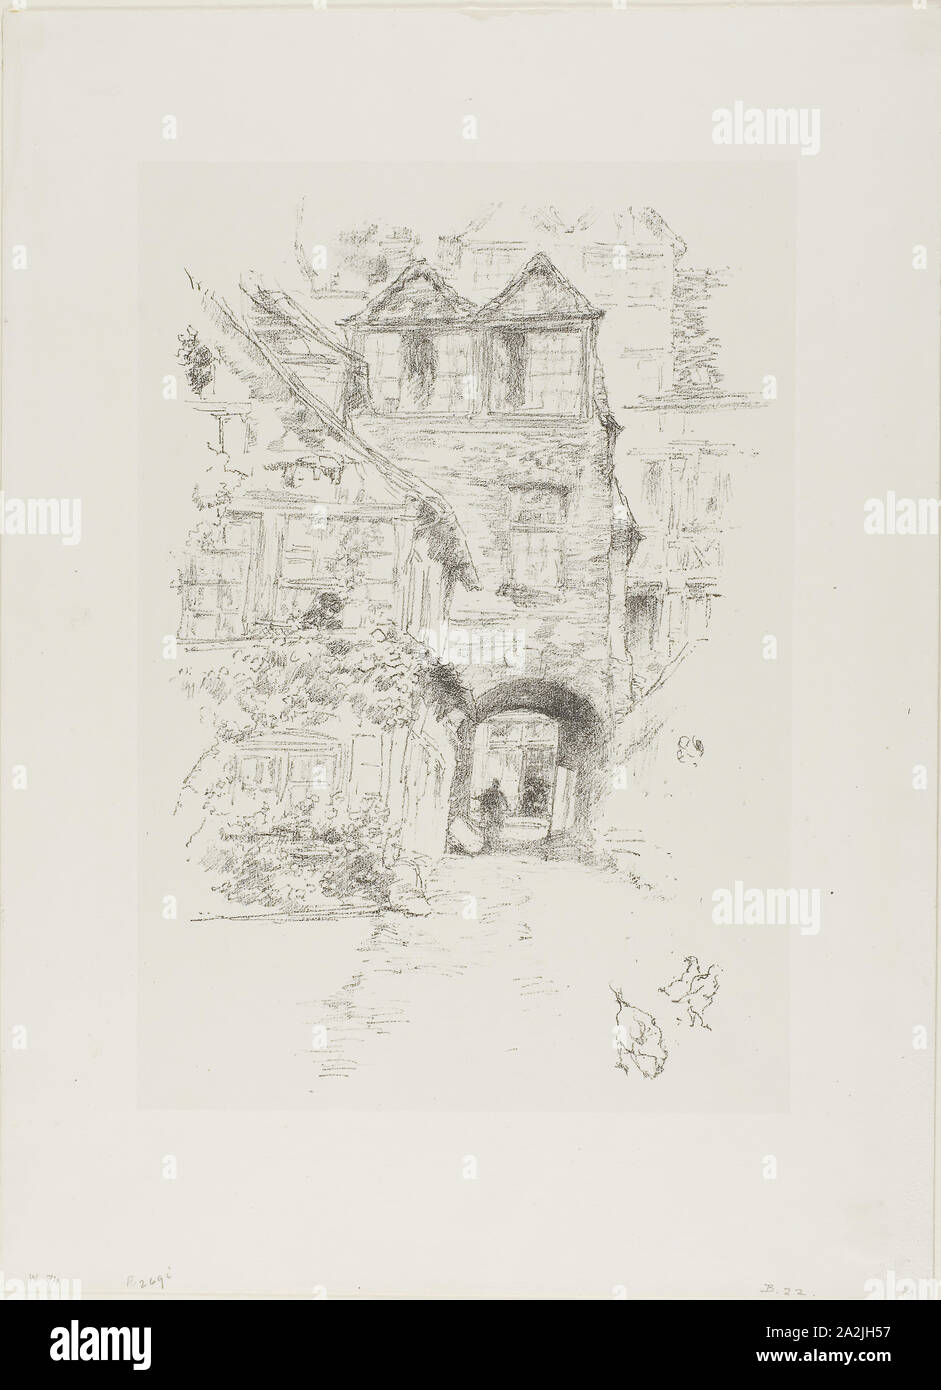 The Priest’s House, Rouen, 1894/95, James McNeill Whistler, American, 1834-1903, United States, Transfer lithograph in black with stumping and scraping, on off-white chine, laid down on white plate paper, 241 x 160 mm (image), 255 x 176 mm (primary support), 345 x 251 mm (secondary support Stock Photo